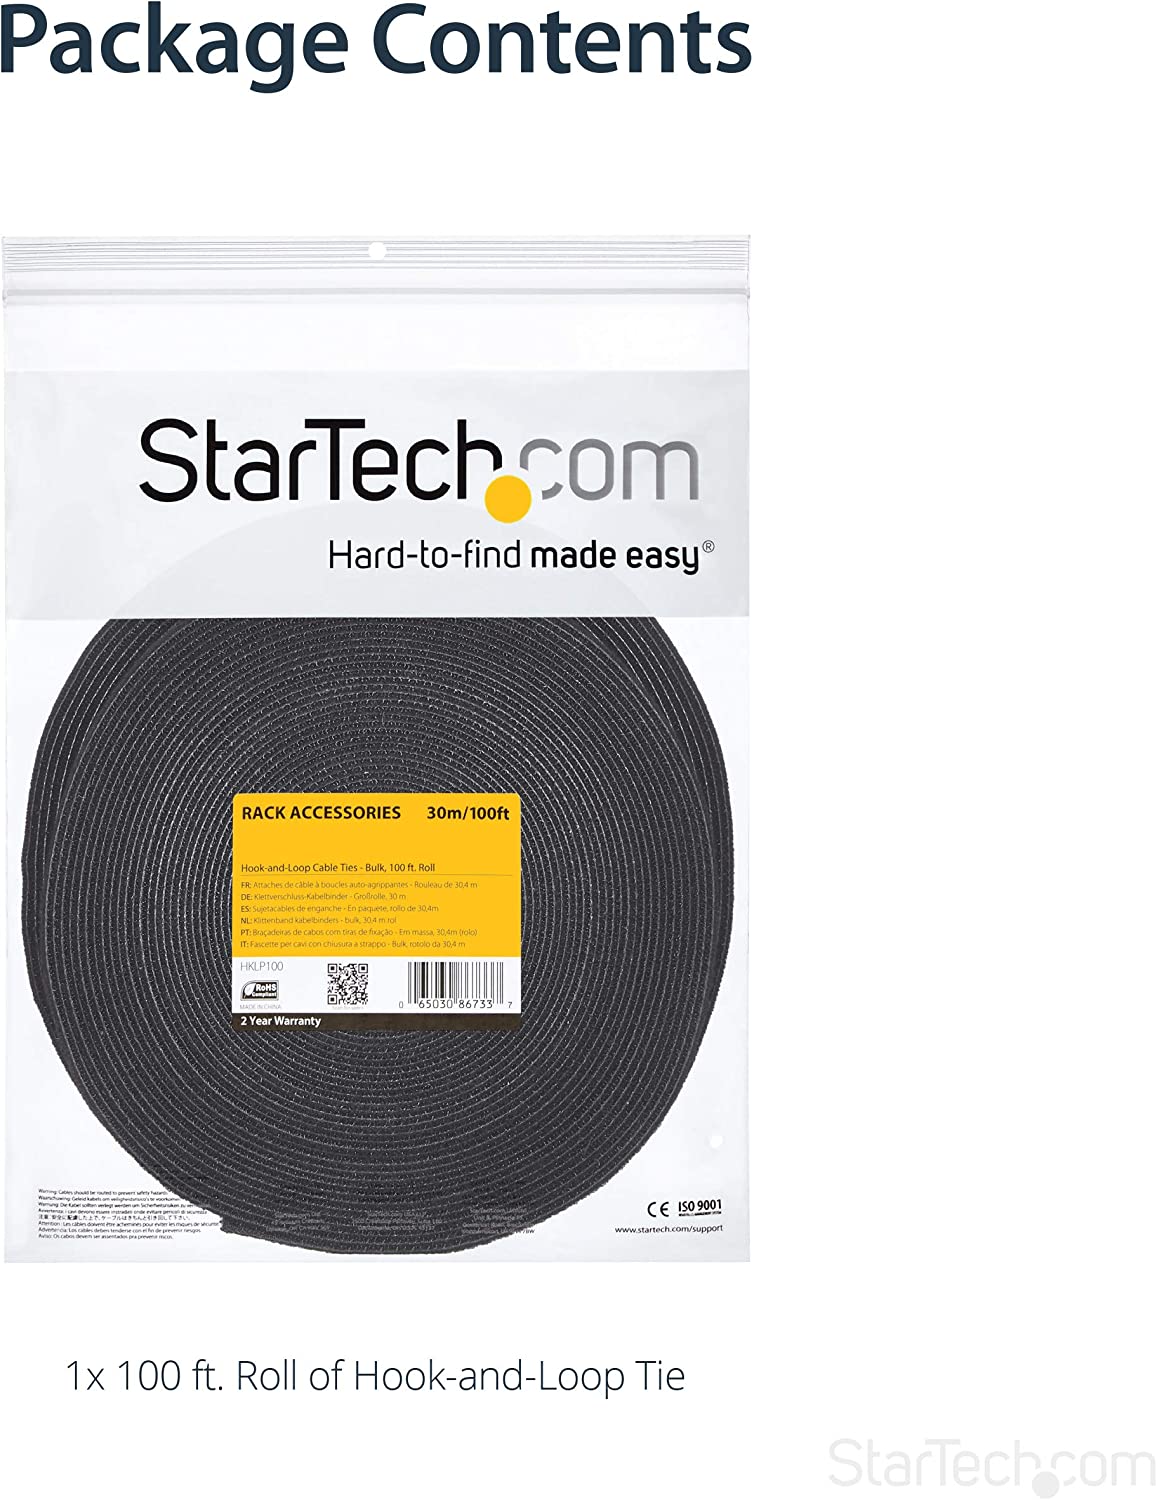 StarTech.com 100ft. Hook and Loop Roll - Cut-to-Size Reusable